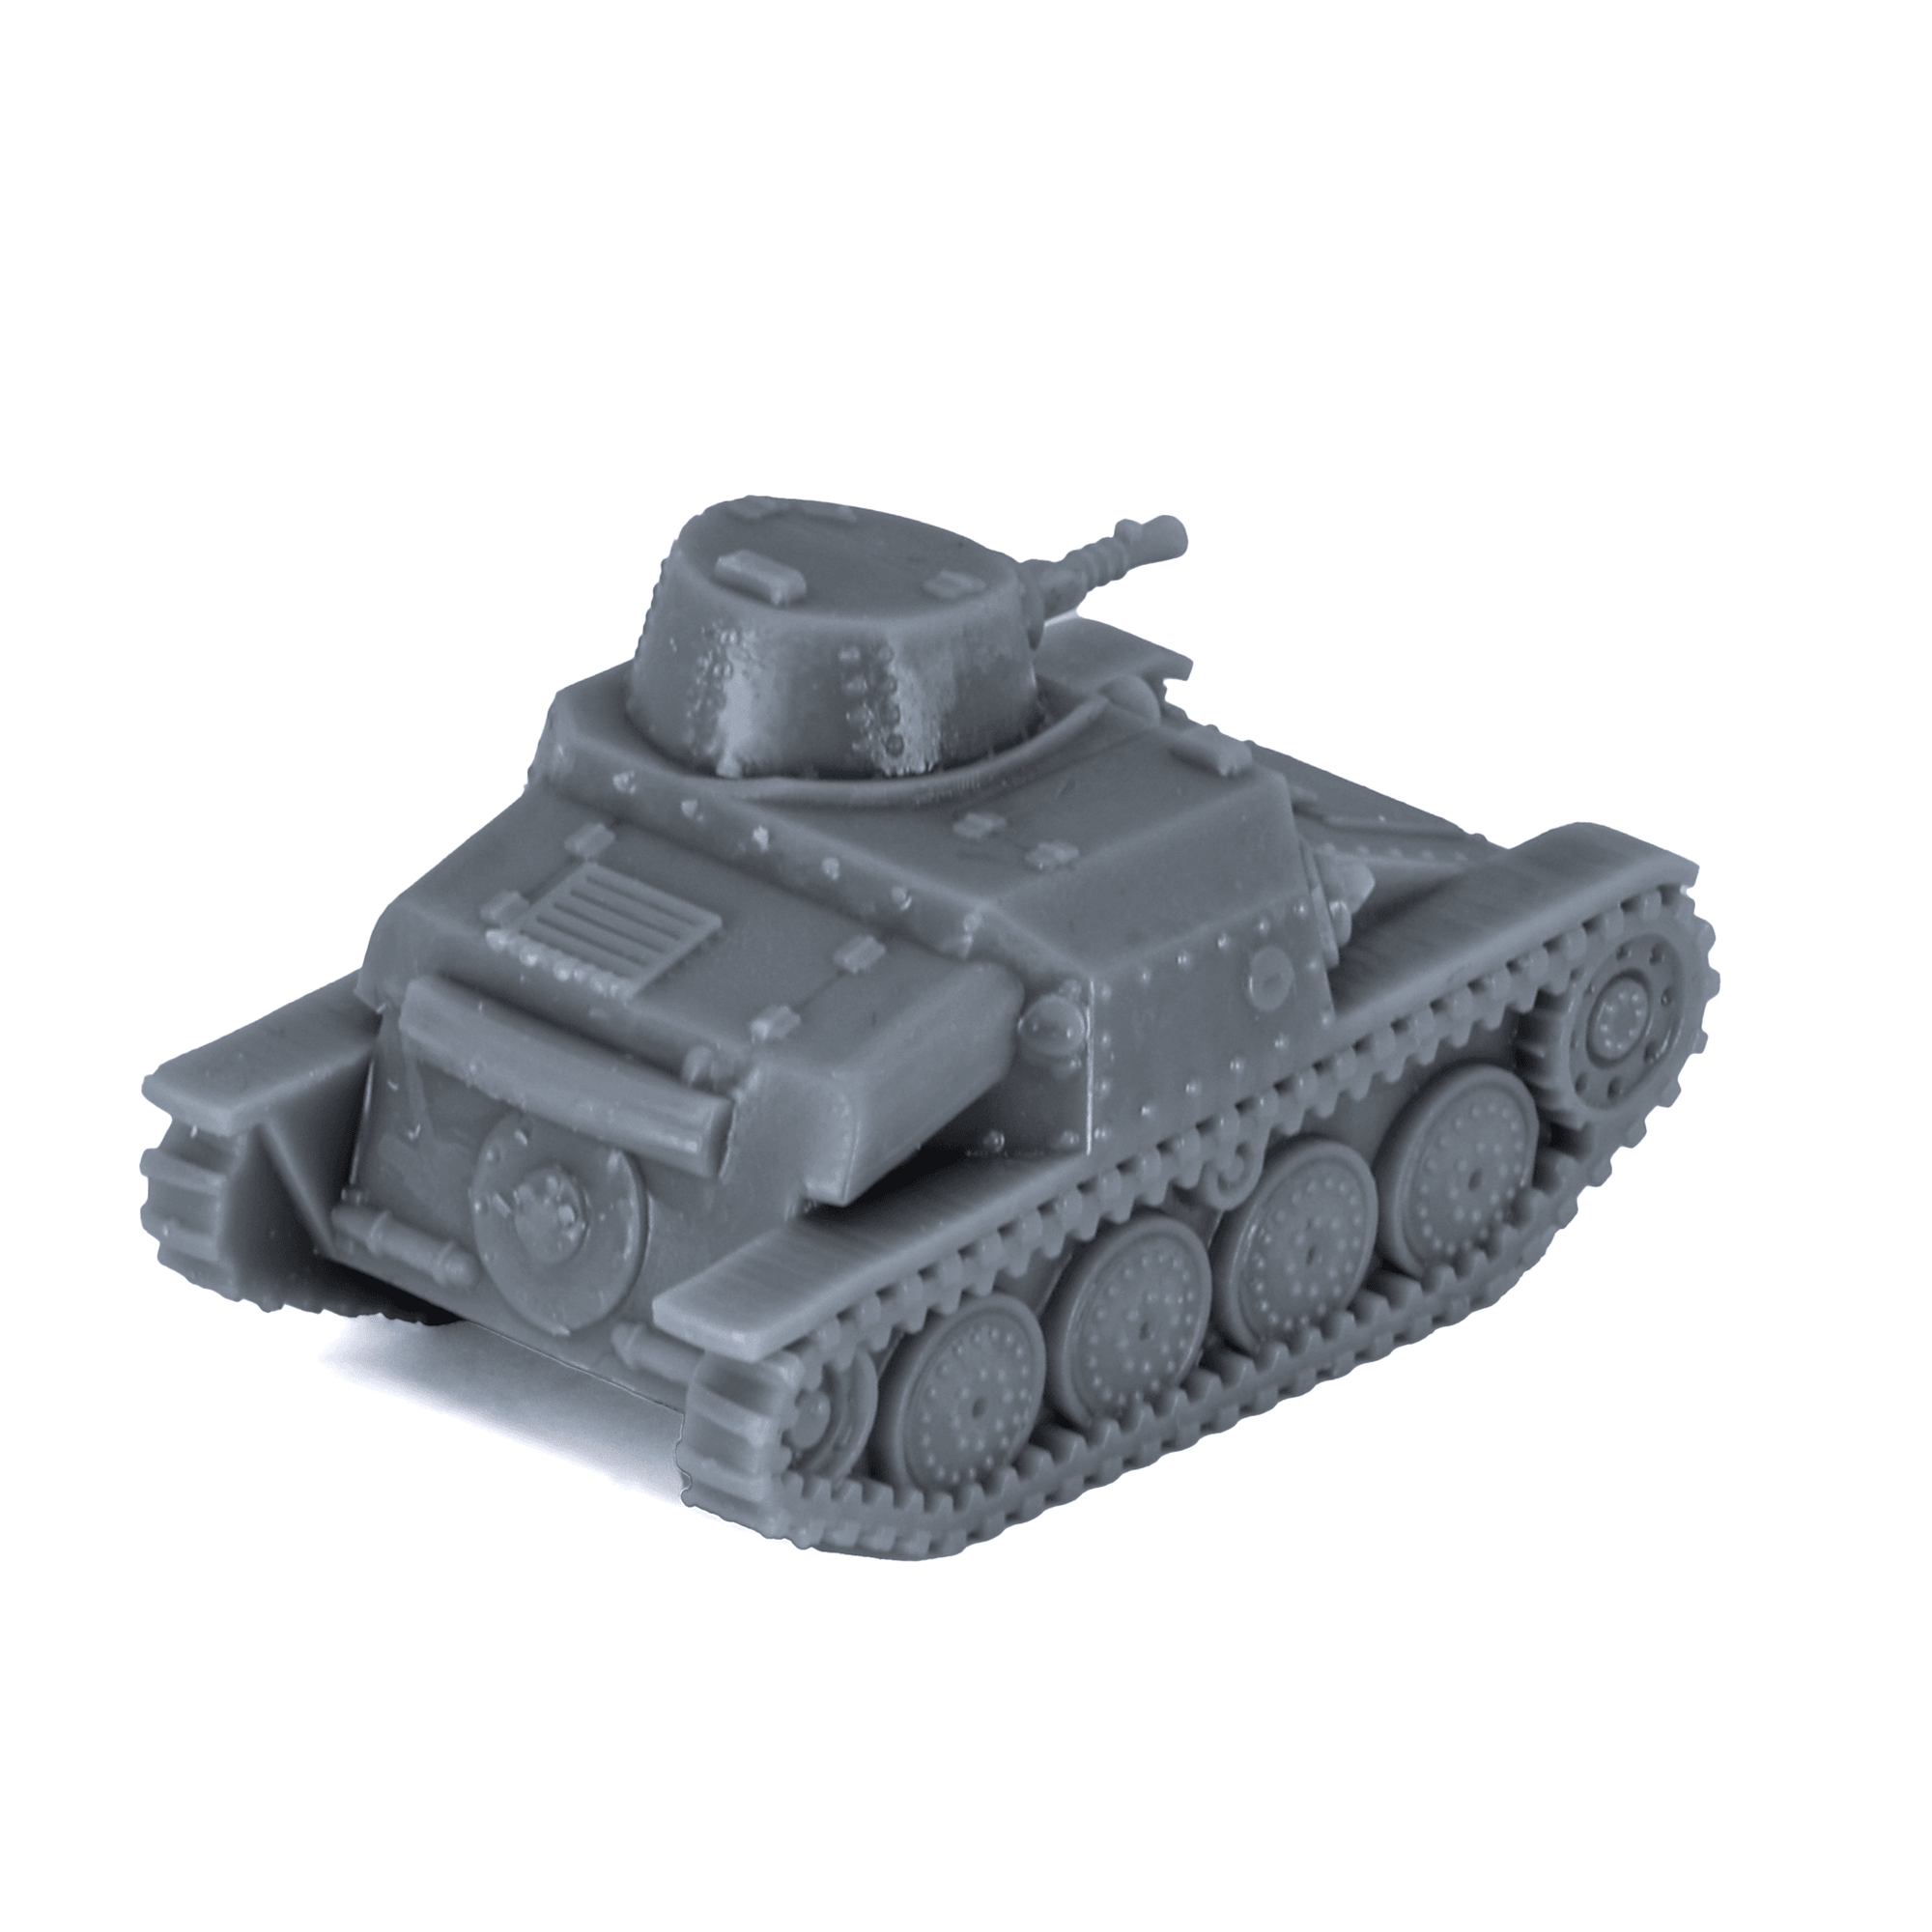 R-l Tankette (Czech export of CKD tankette AH-IV) - Alternate Ending Games - axis-and-allies